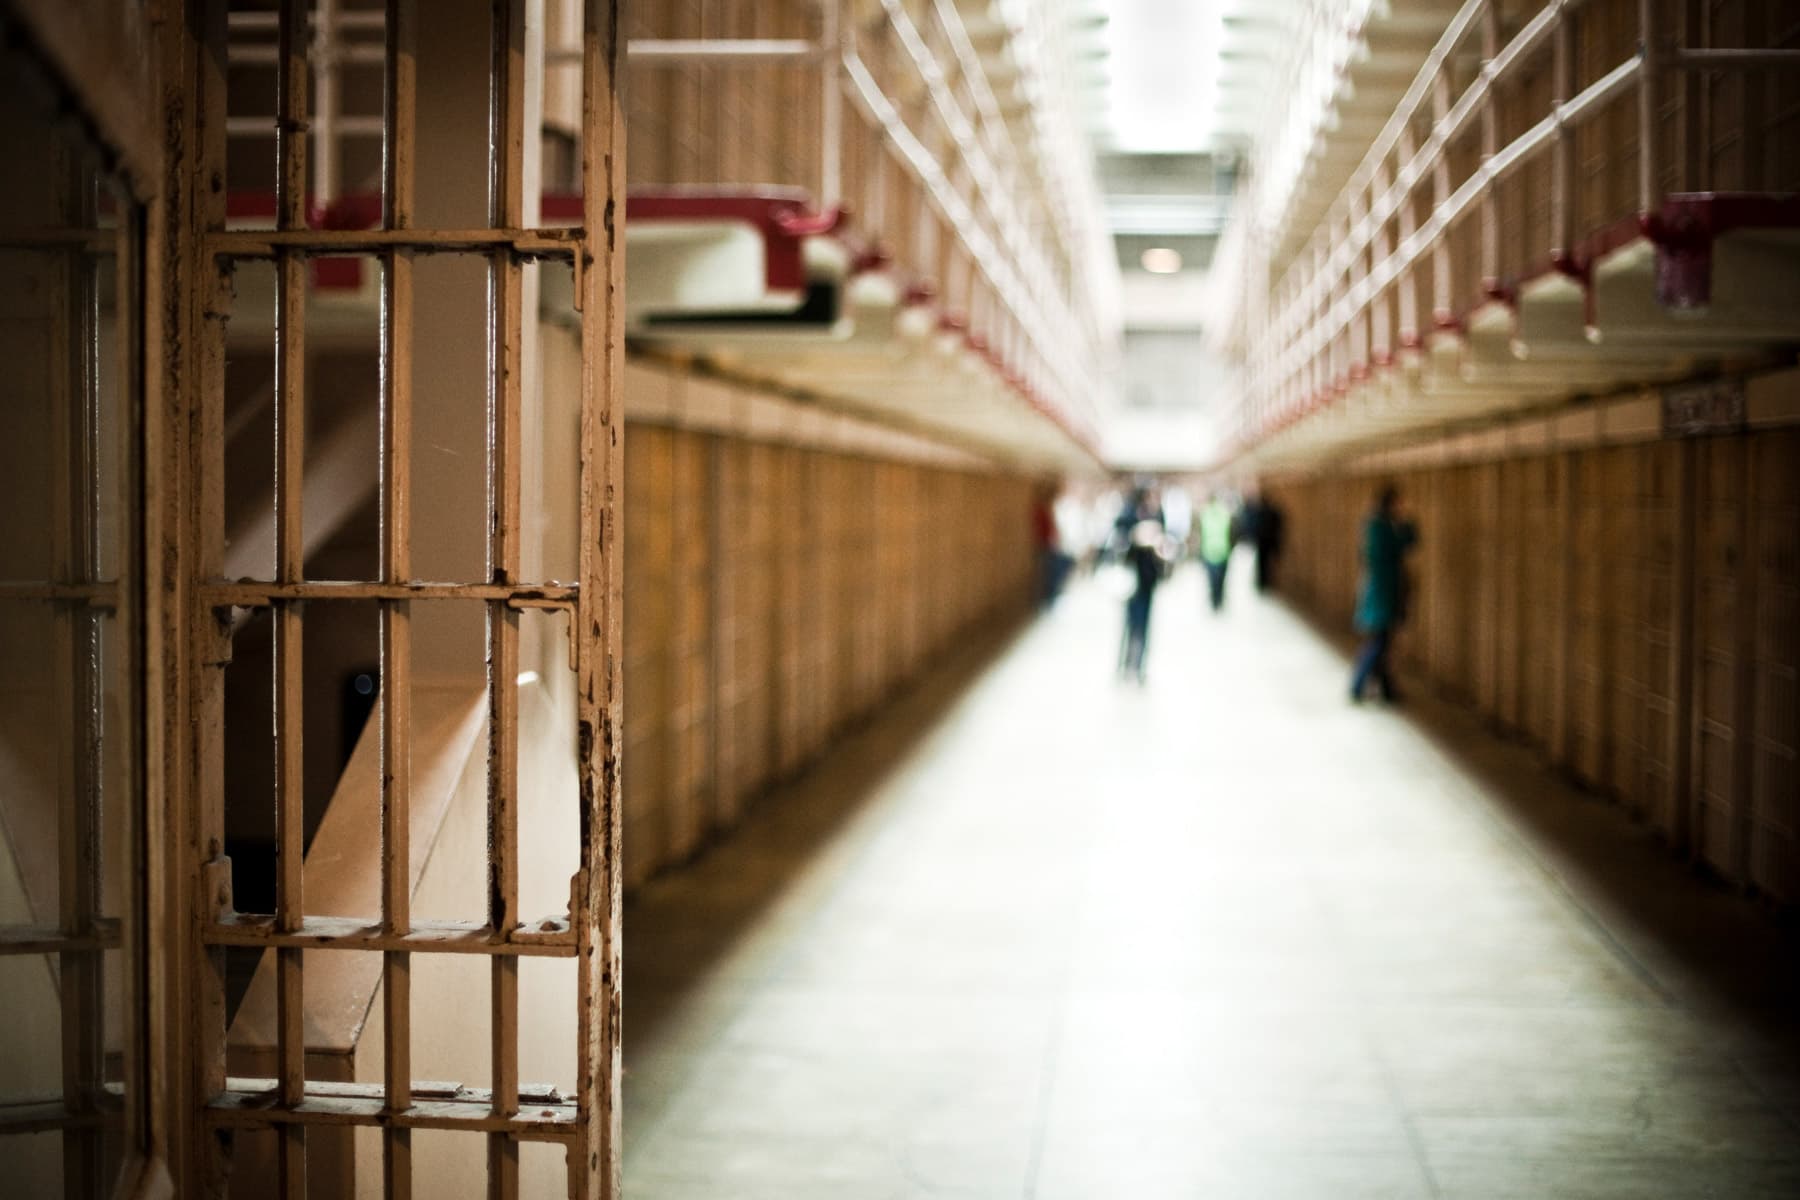 Is There Mental Health Help If You’re in Prison?